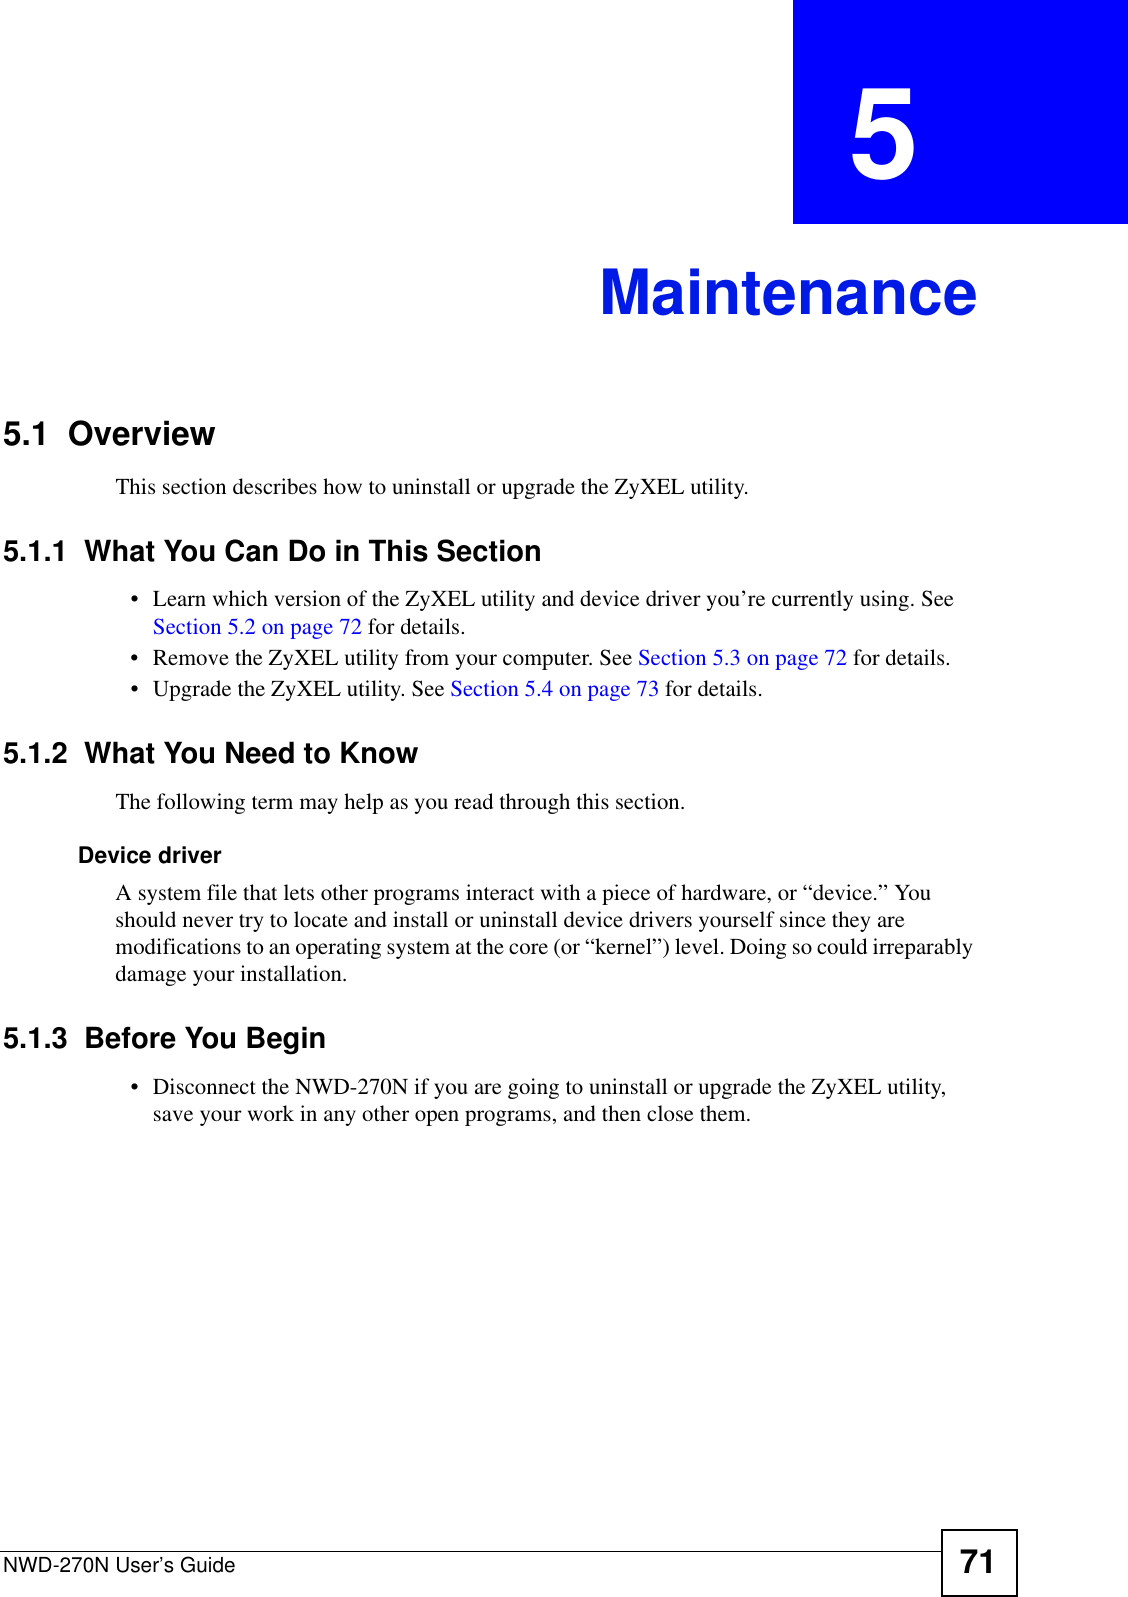 NWD-270N User’s Guide 71CHAPTER  5 Maintenance5.1  OverviewThis section describes how to uninstall or upgrade the ZyXEL utility.5.1.1  What You Can Do in This Section• Learn which version of the ZyXEL utility and device driver you’re currently using. See Section 5.2 on page 72 for details.• Remove the ZyXEL utility from your computer. See Section 5.3 on page 72 for details.• Upgrade the ZyXEL utility. See Section 5.4 on page 73 for details.5.1.2  What You Need to KnowThe following term may help as you read through this section.Device driverA system file that lets other programs interact with a piece of hardware, or “device.” You should never try to locate and install or uninstall device drivers yourself since they are modifications to an operating system at the core (or “kernel”) level. Doing so could irreparably damage your installation.5.1.3  Before You Begin• Disconnect the NWD-270N if you are going to uninstall or upgrade the ZyXEL utility, save your work in any other open programs, and then close them.